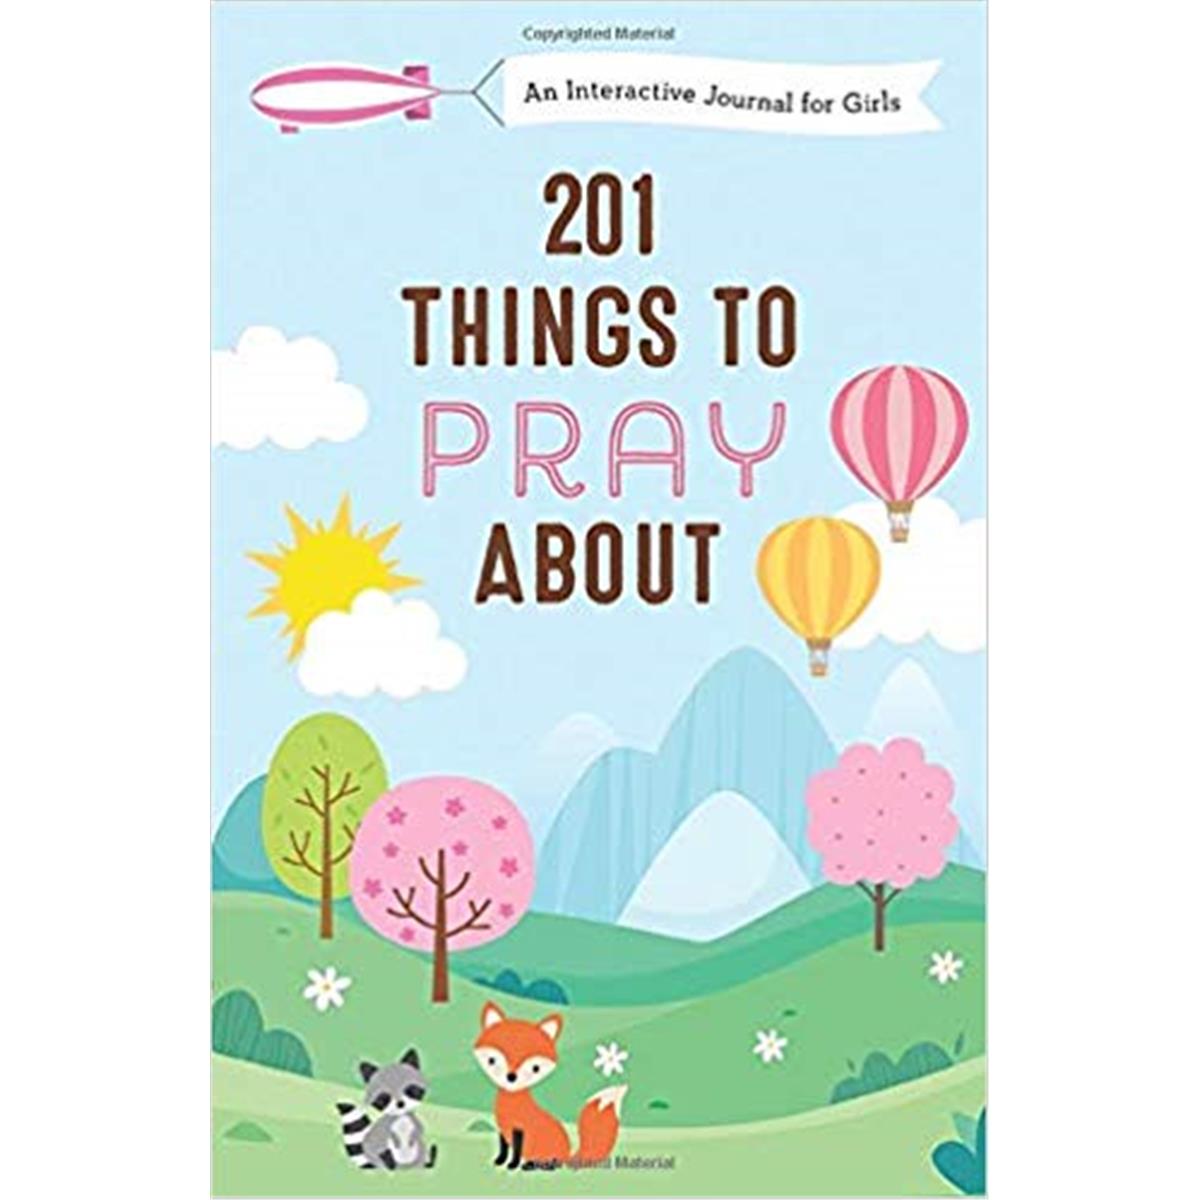 138968 201 Things To Pray About - Girls - Mar 2020